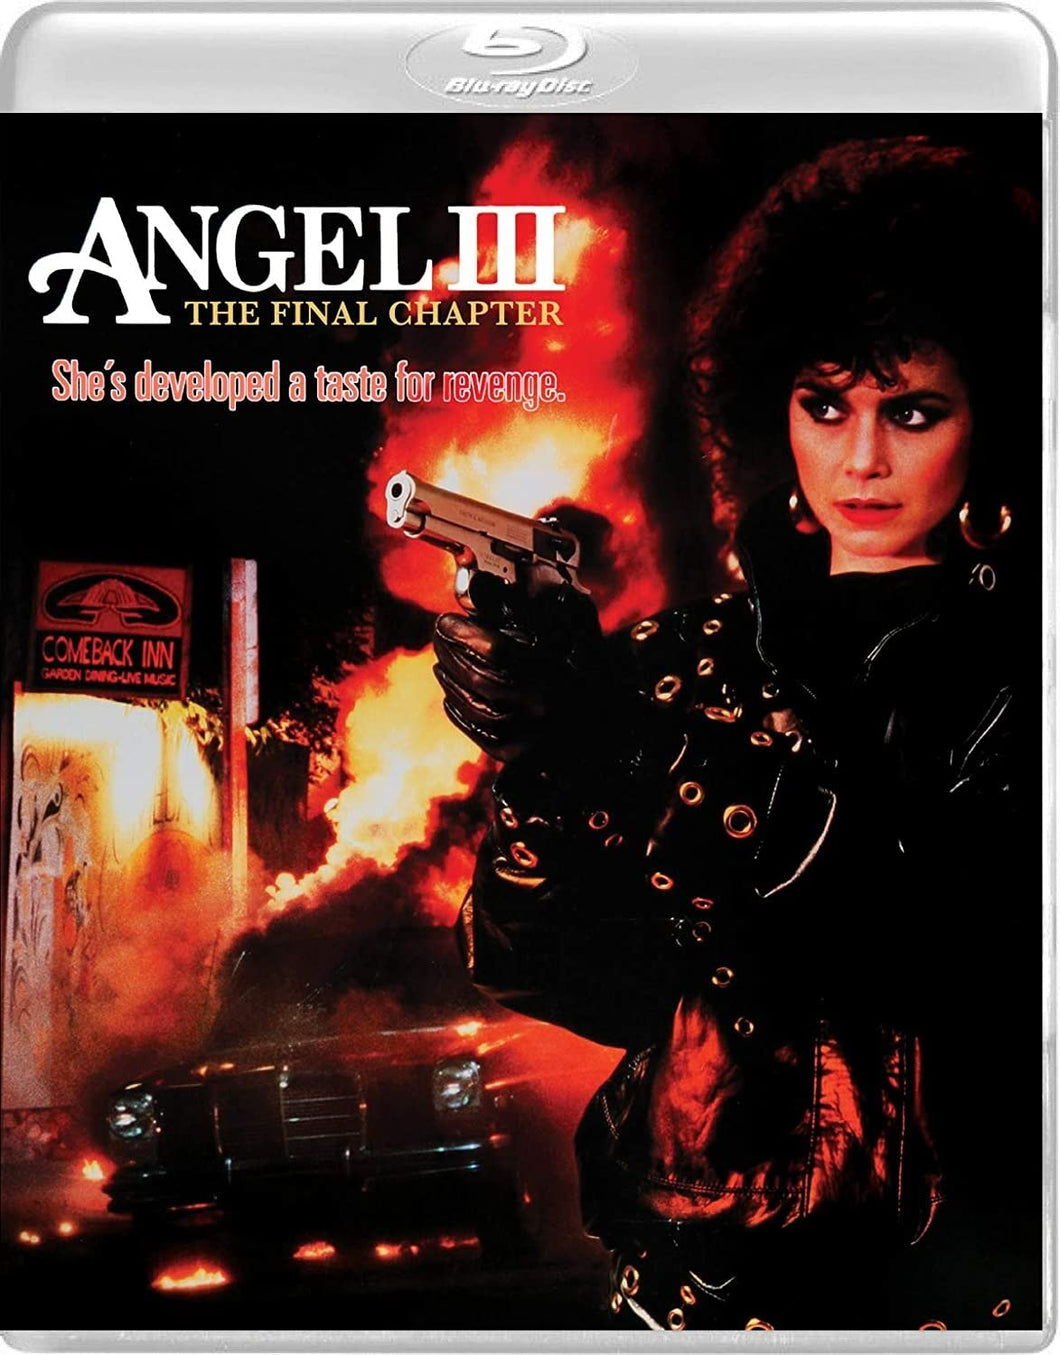 Motion Picture- Angel III: The Final Chapter